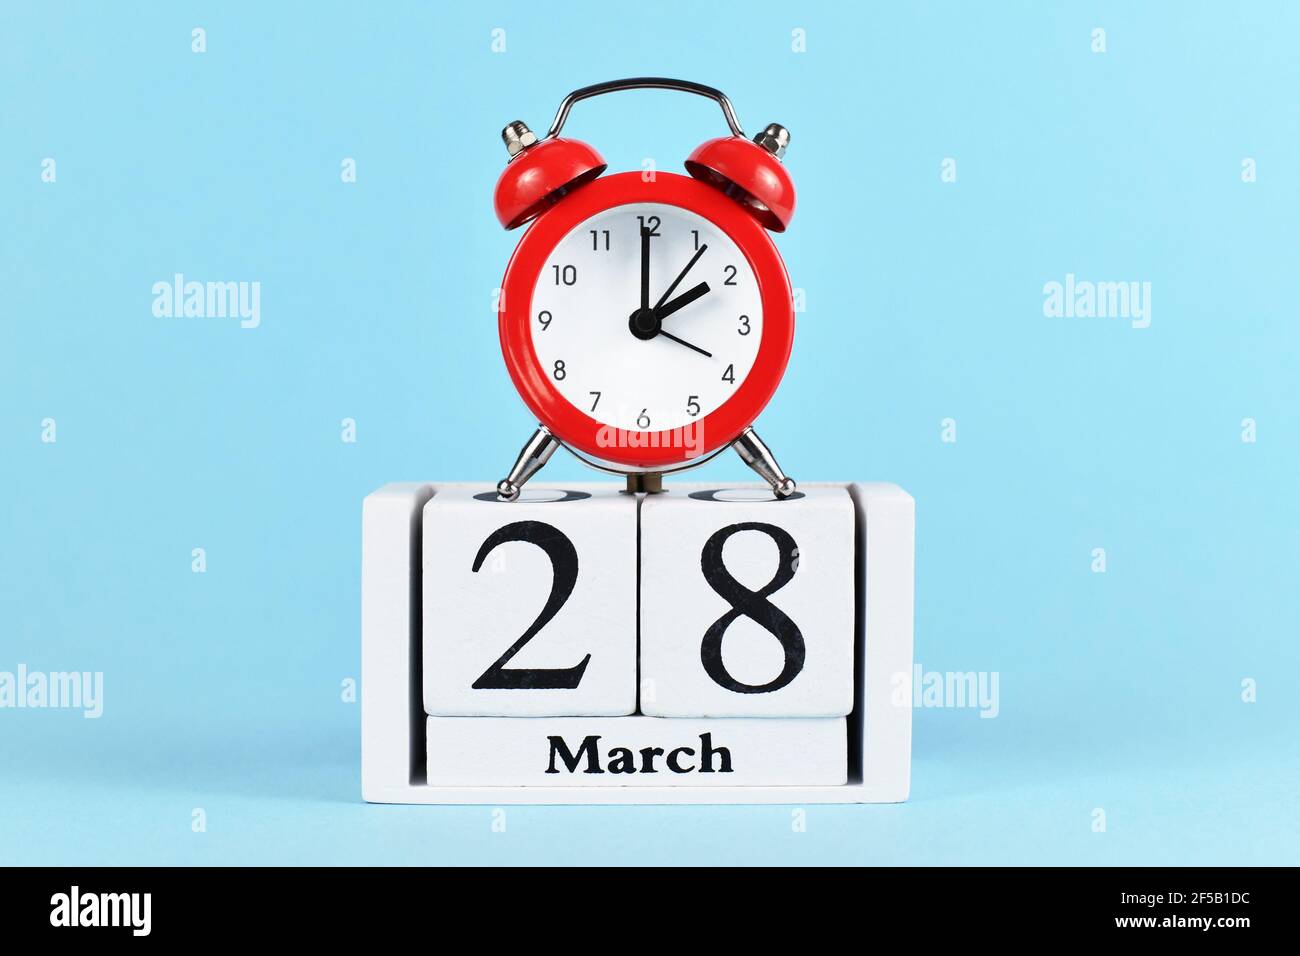 Time change for daylight saving summer time in Europe on March 28th concept with red alarm clock and calendar on blue background Stock Photo